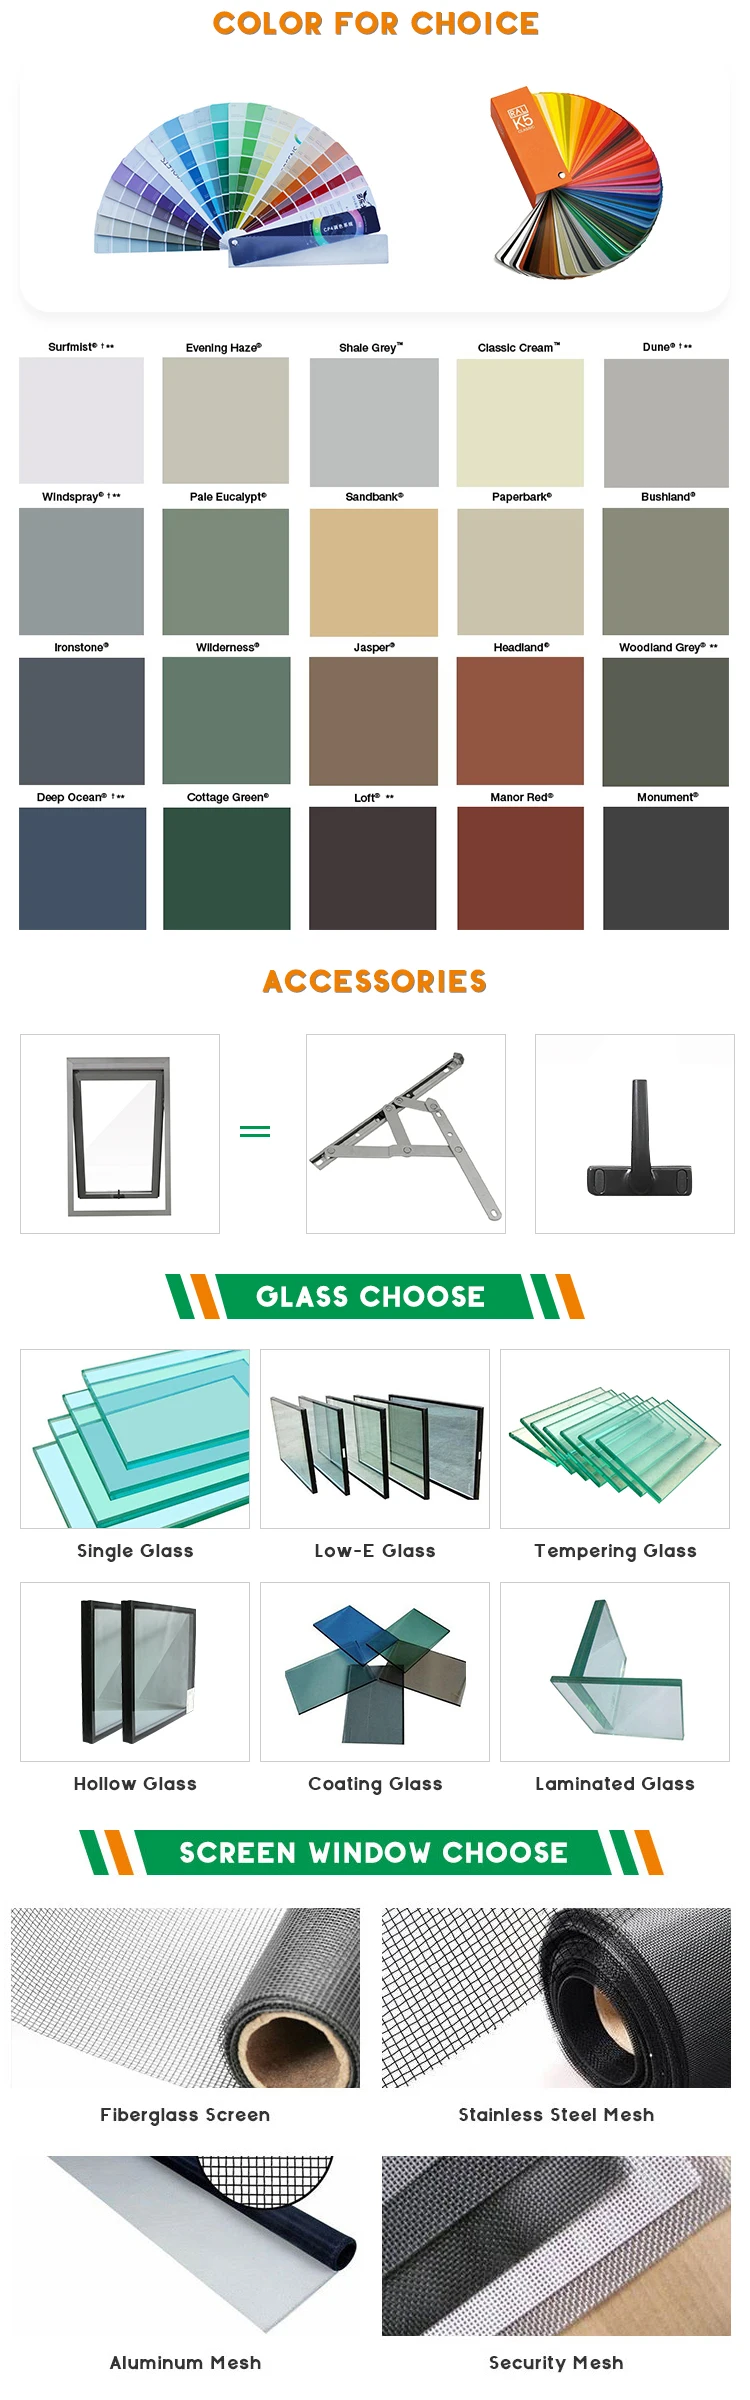 Factory Directly High Quality Cheap price for Aluminum Alloy Awning Windows